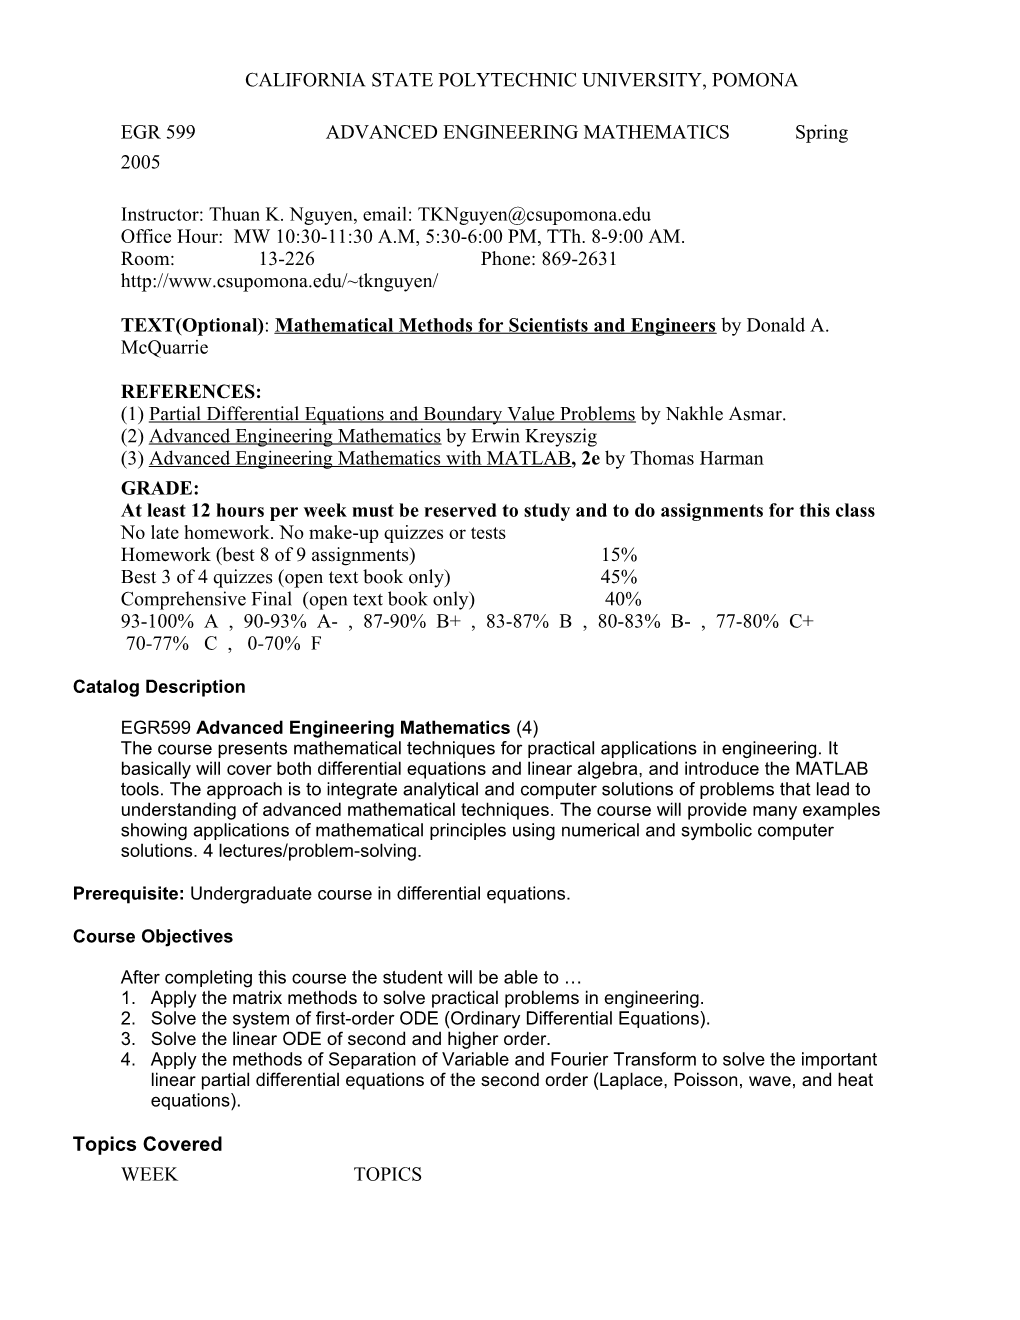 Egr 509 Advanced Differential Equations for Engineers